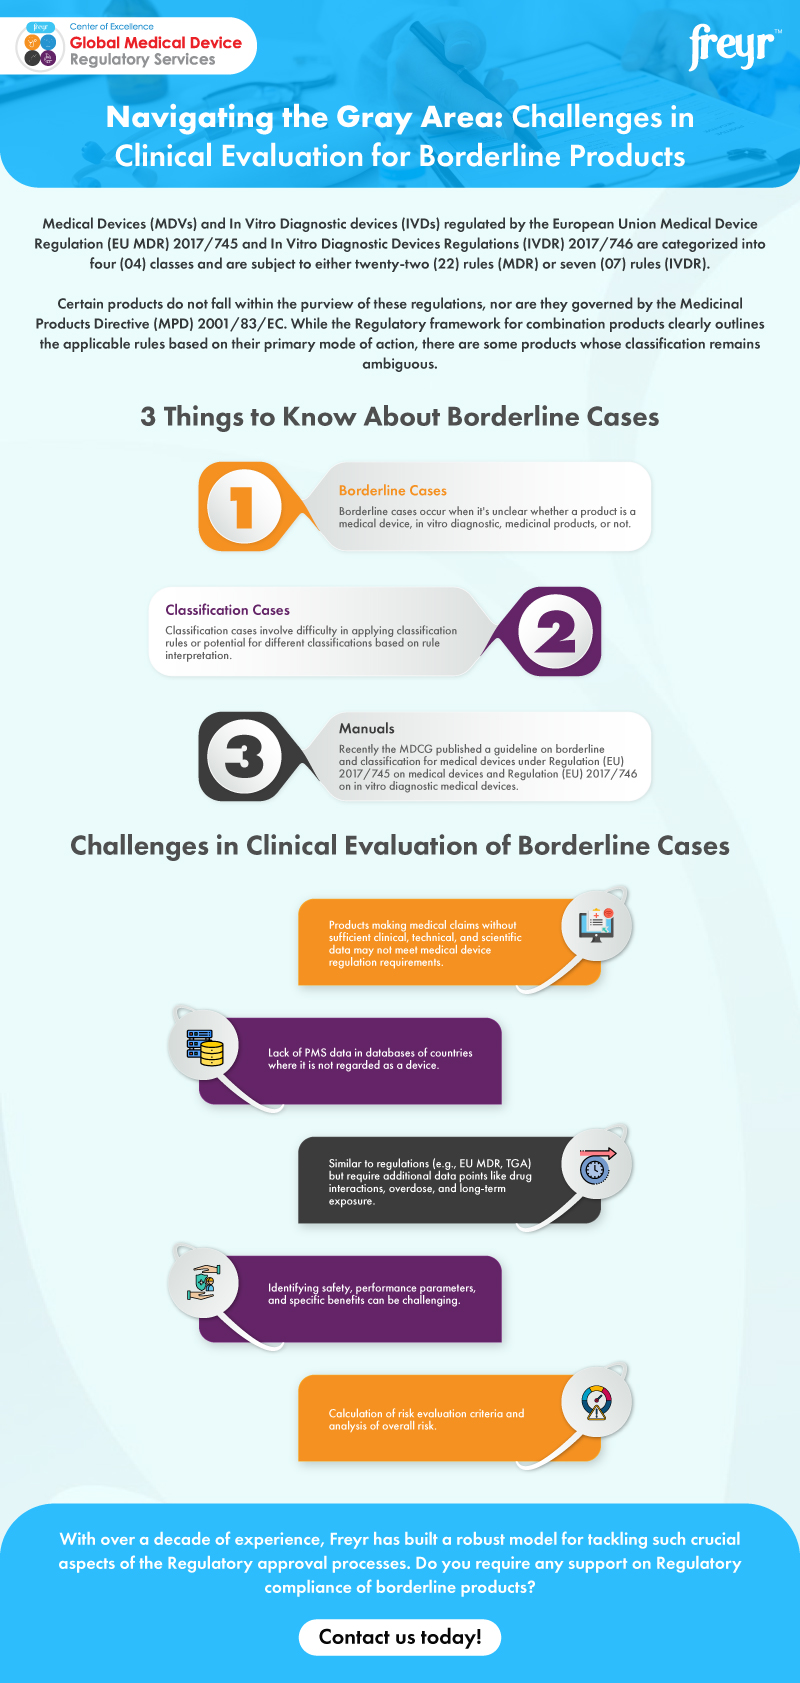 Navigating the Gray Area: Challenges in Clinical Evaluation for Borderline Products